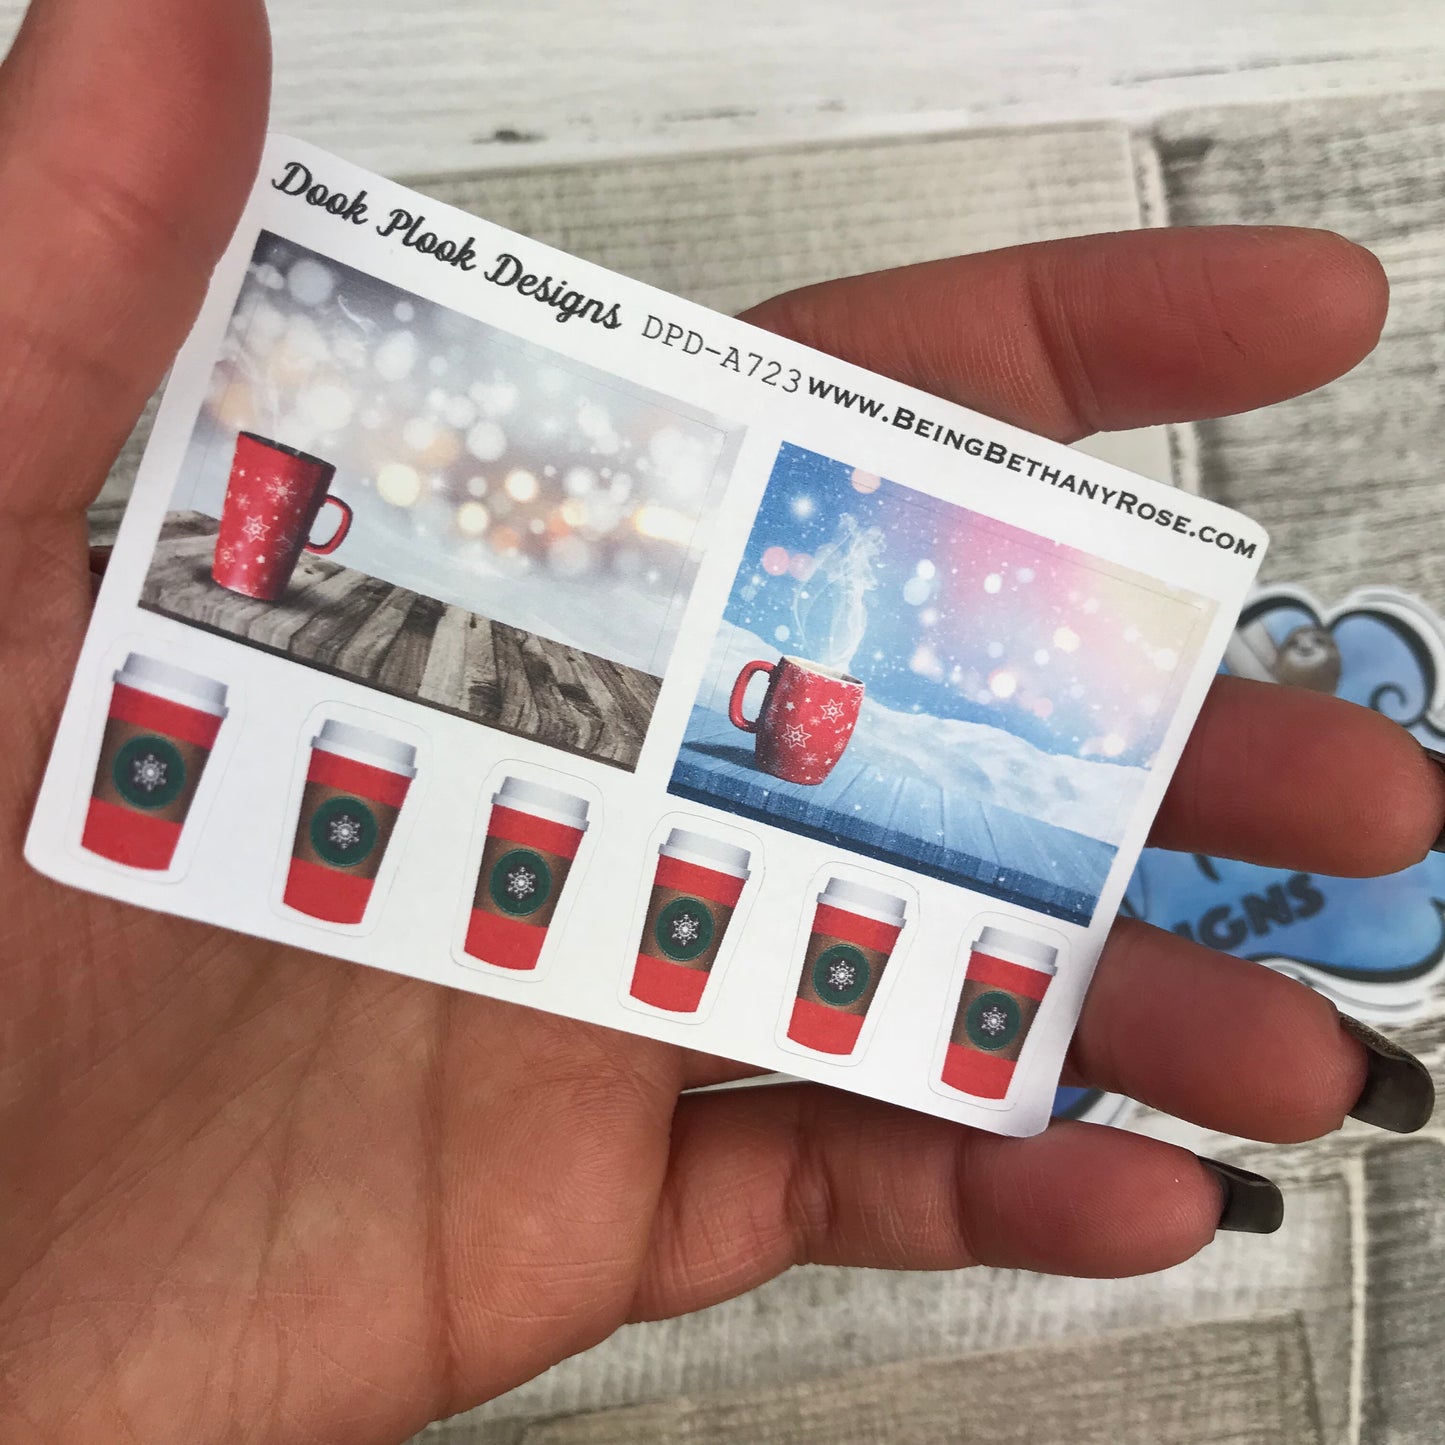 Christmas Coffee Cup / Drink stickers - Small Sampler Size (A723)